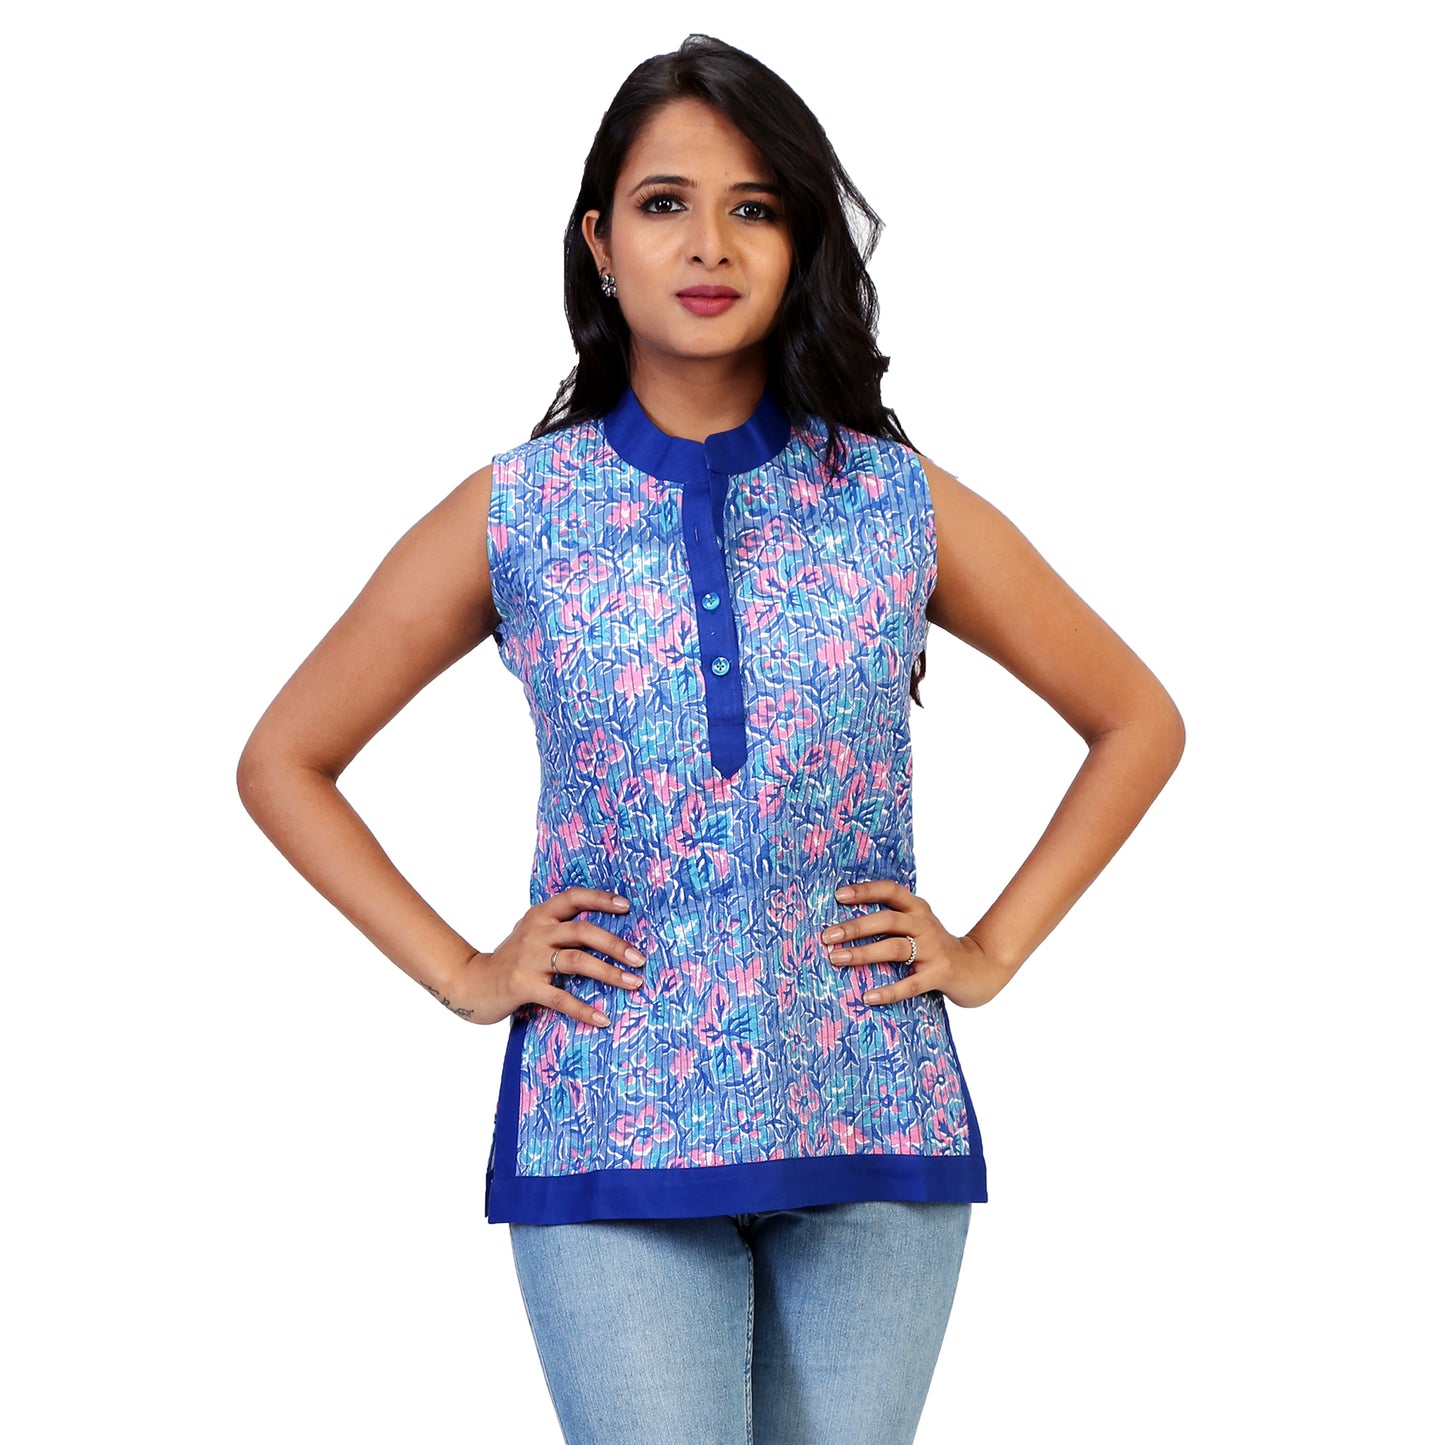 Tagai Work Floral Sleeveless Top With Blue Border